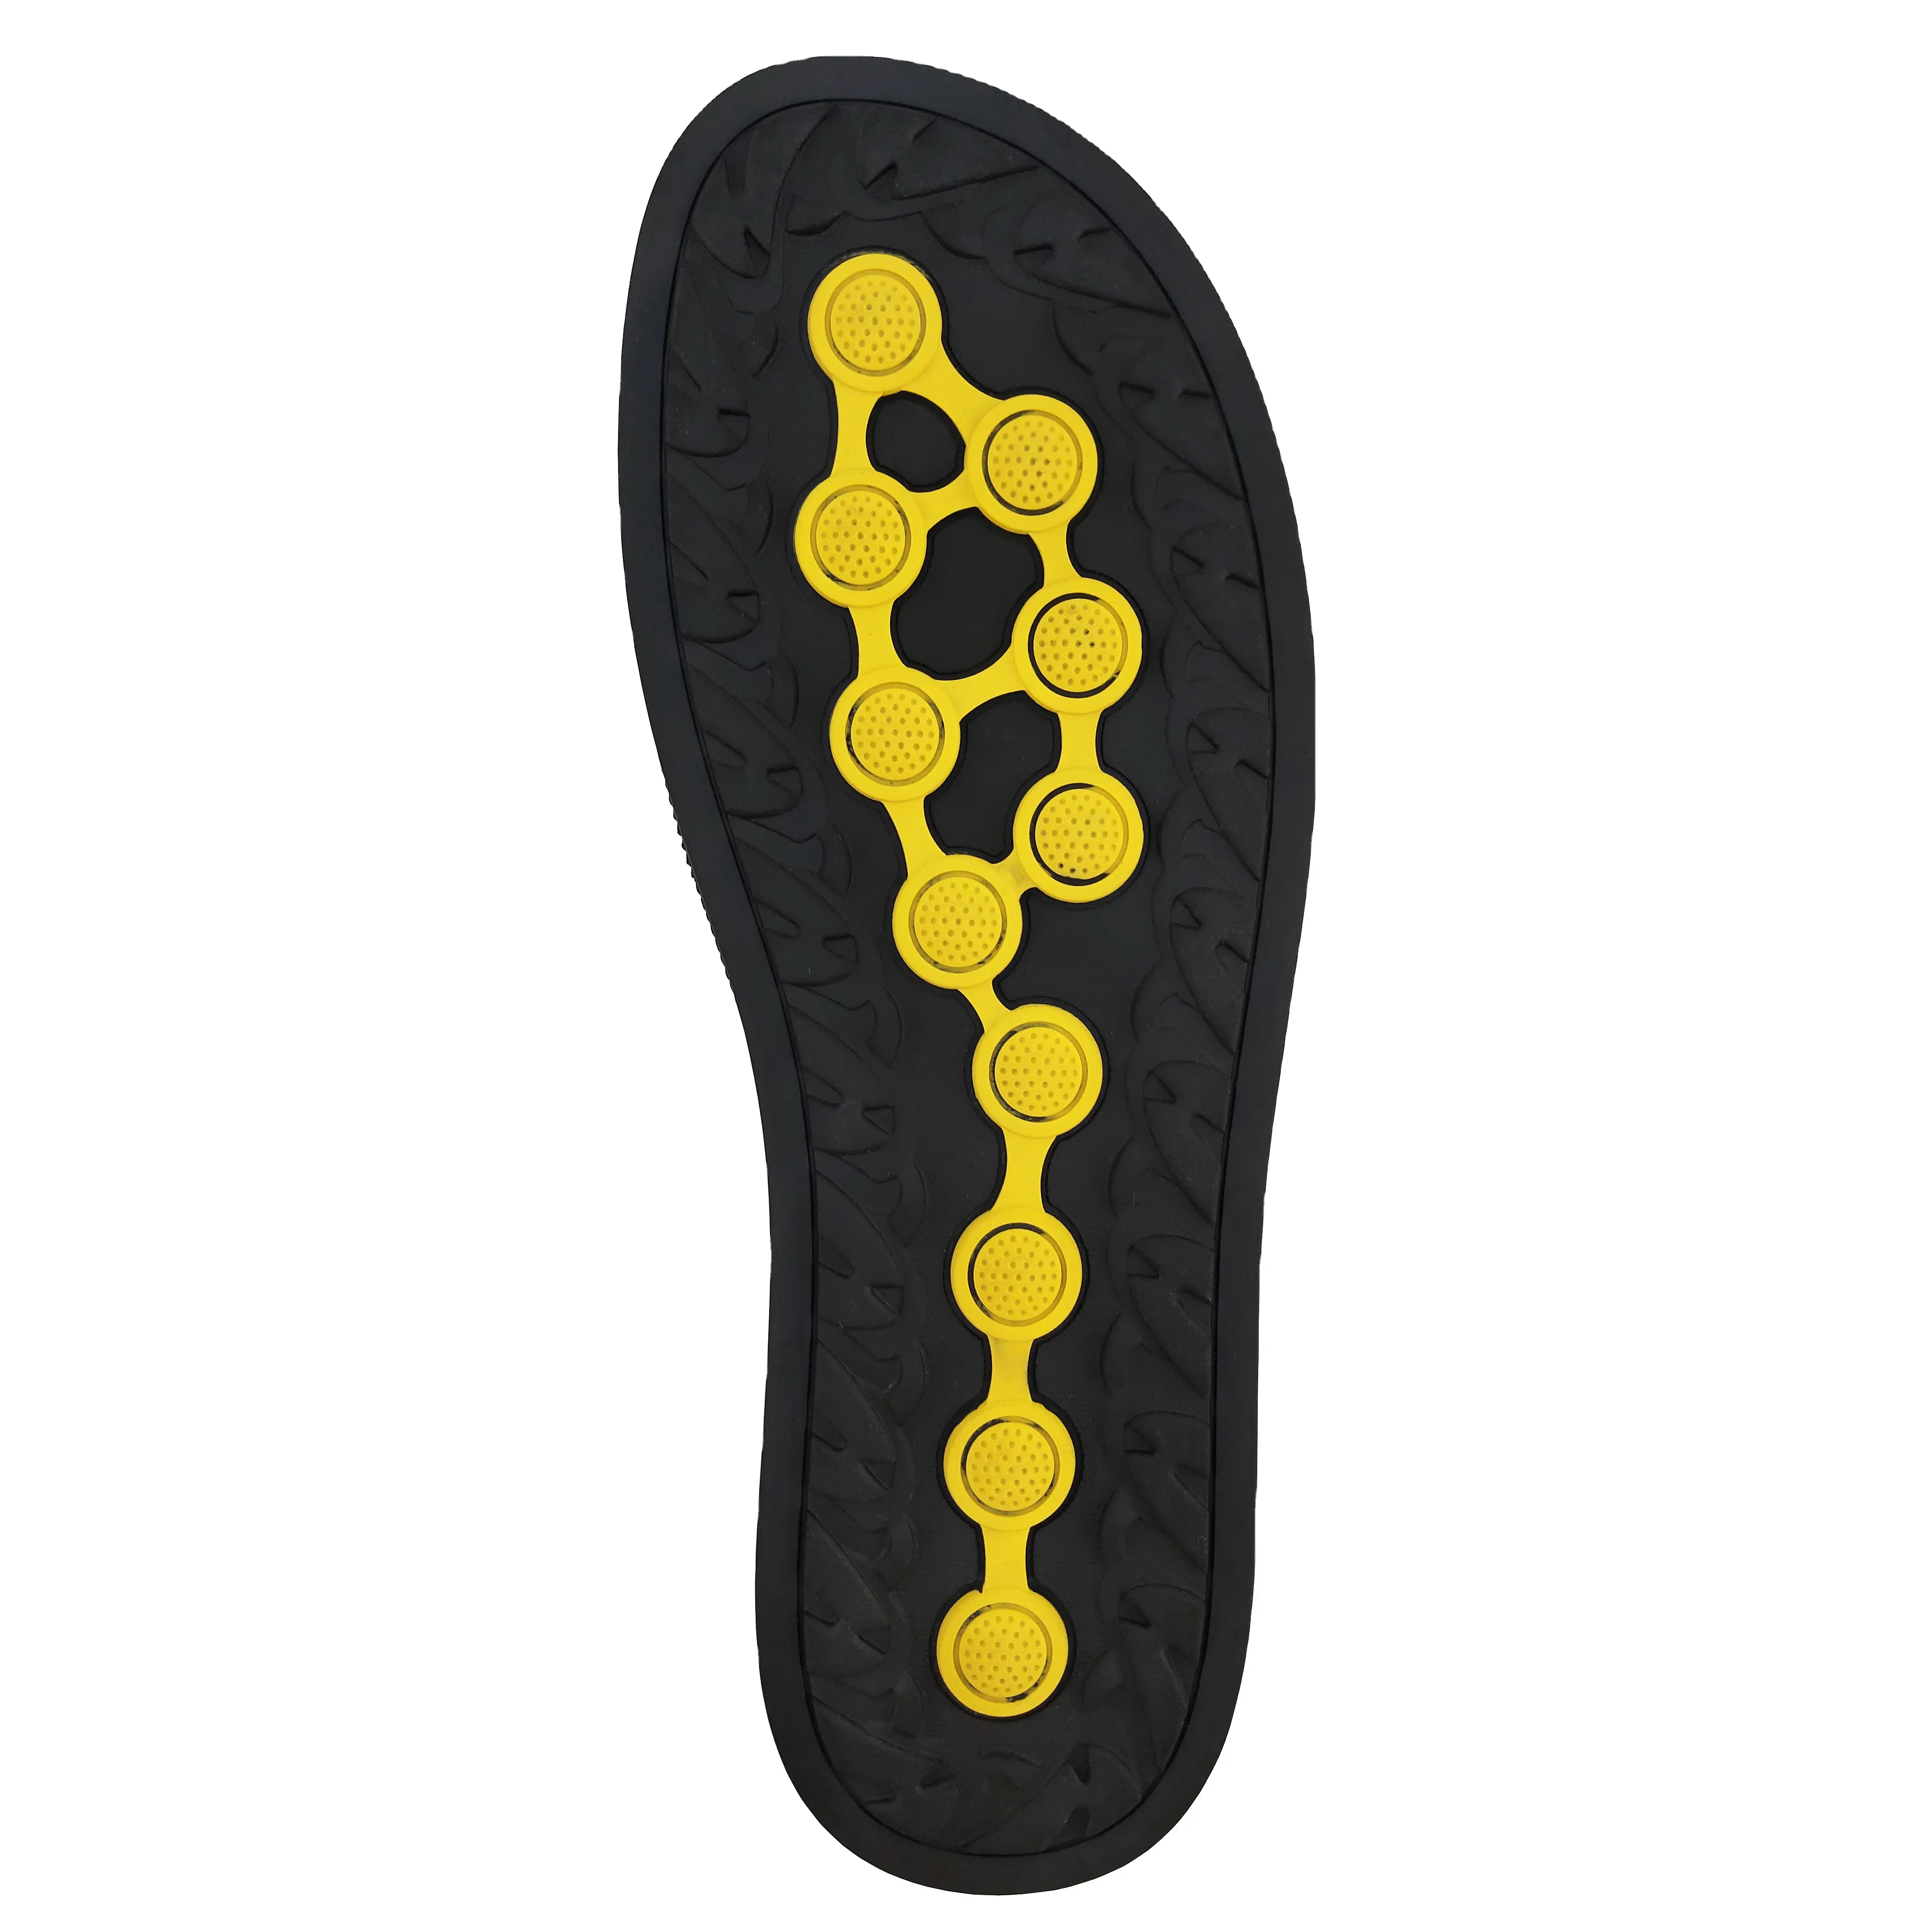 MAN SHOE SOLE FOR SANDAL AND SLIPPER GOOD DESIGN RUBBER SOLES FOR SALE